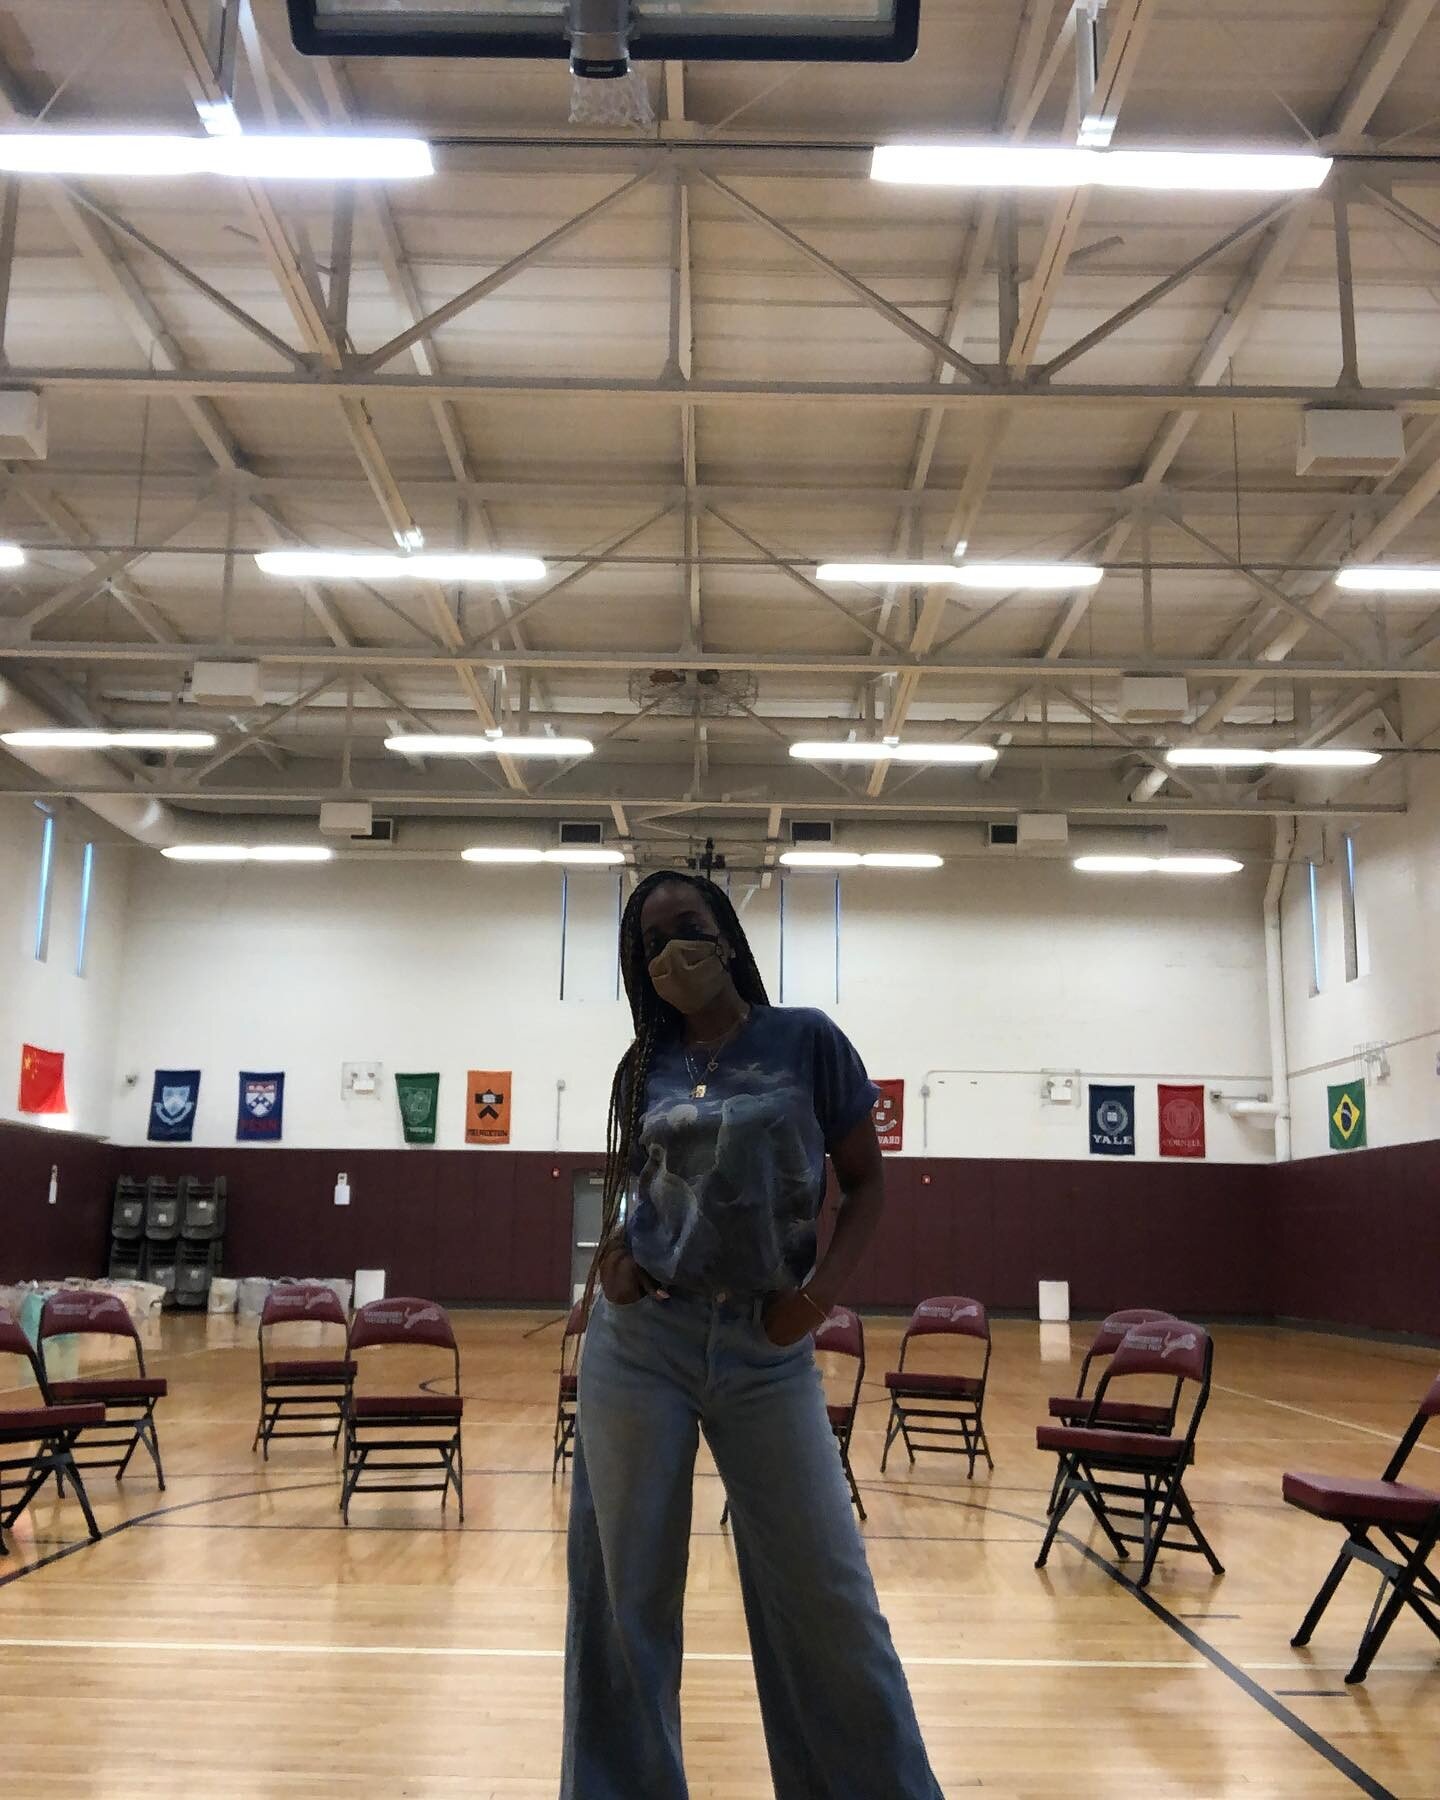 Love it Here. 

For 45 minutes to an hour, we get to drop what&rsquo;s going on or sometimes bring it to the group, to be present here. 

In the gymnasium throwing free throws before group, eating hot flamins or takis in the cafeteria, listening to t